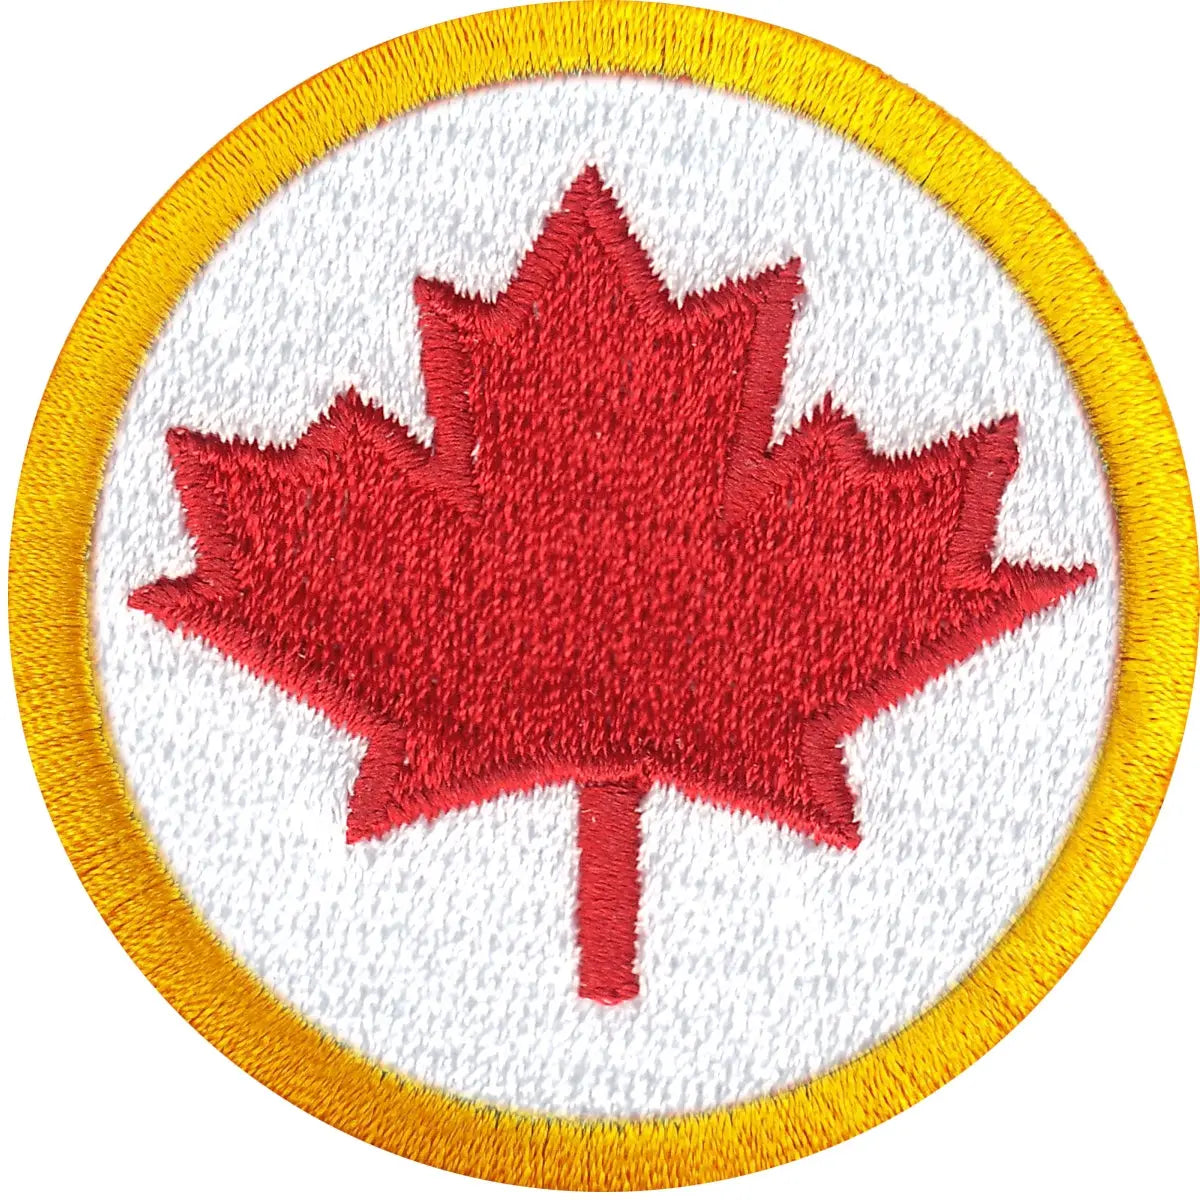 Canadian History Wilderness Scout Merit Badge Iron on Patch 